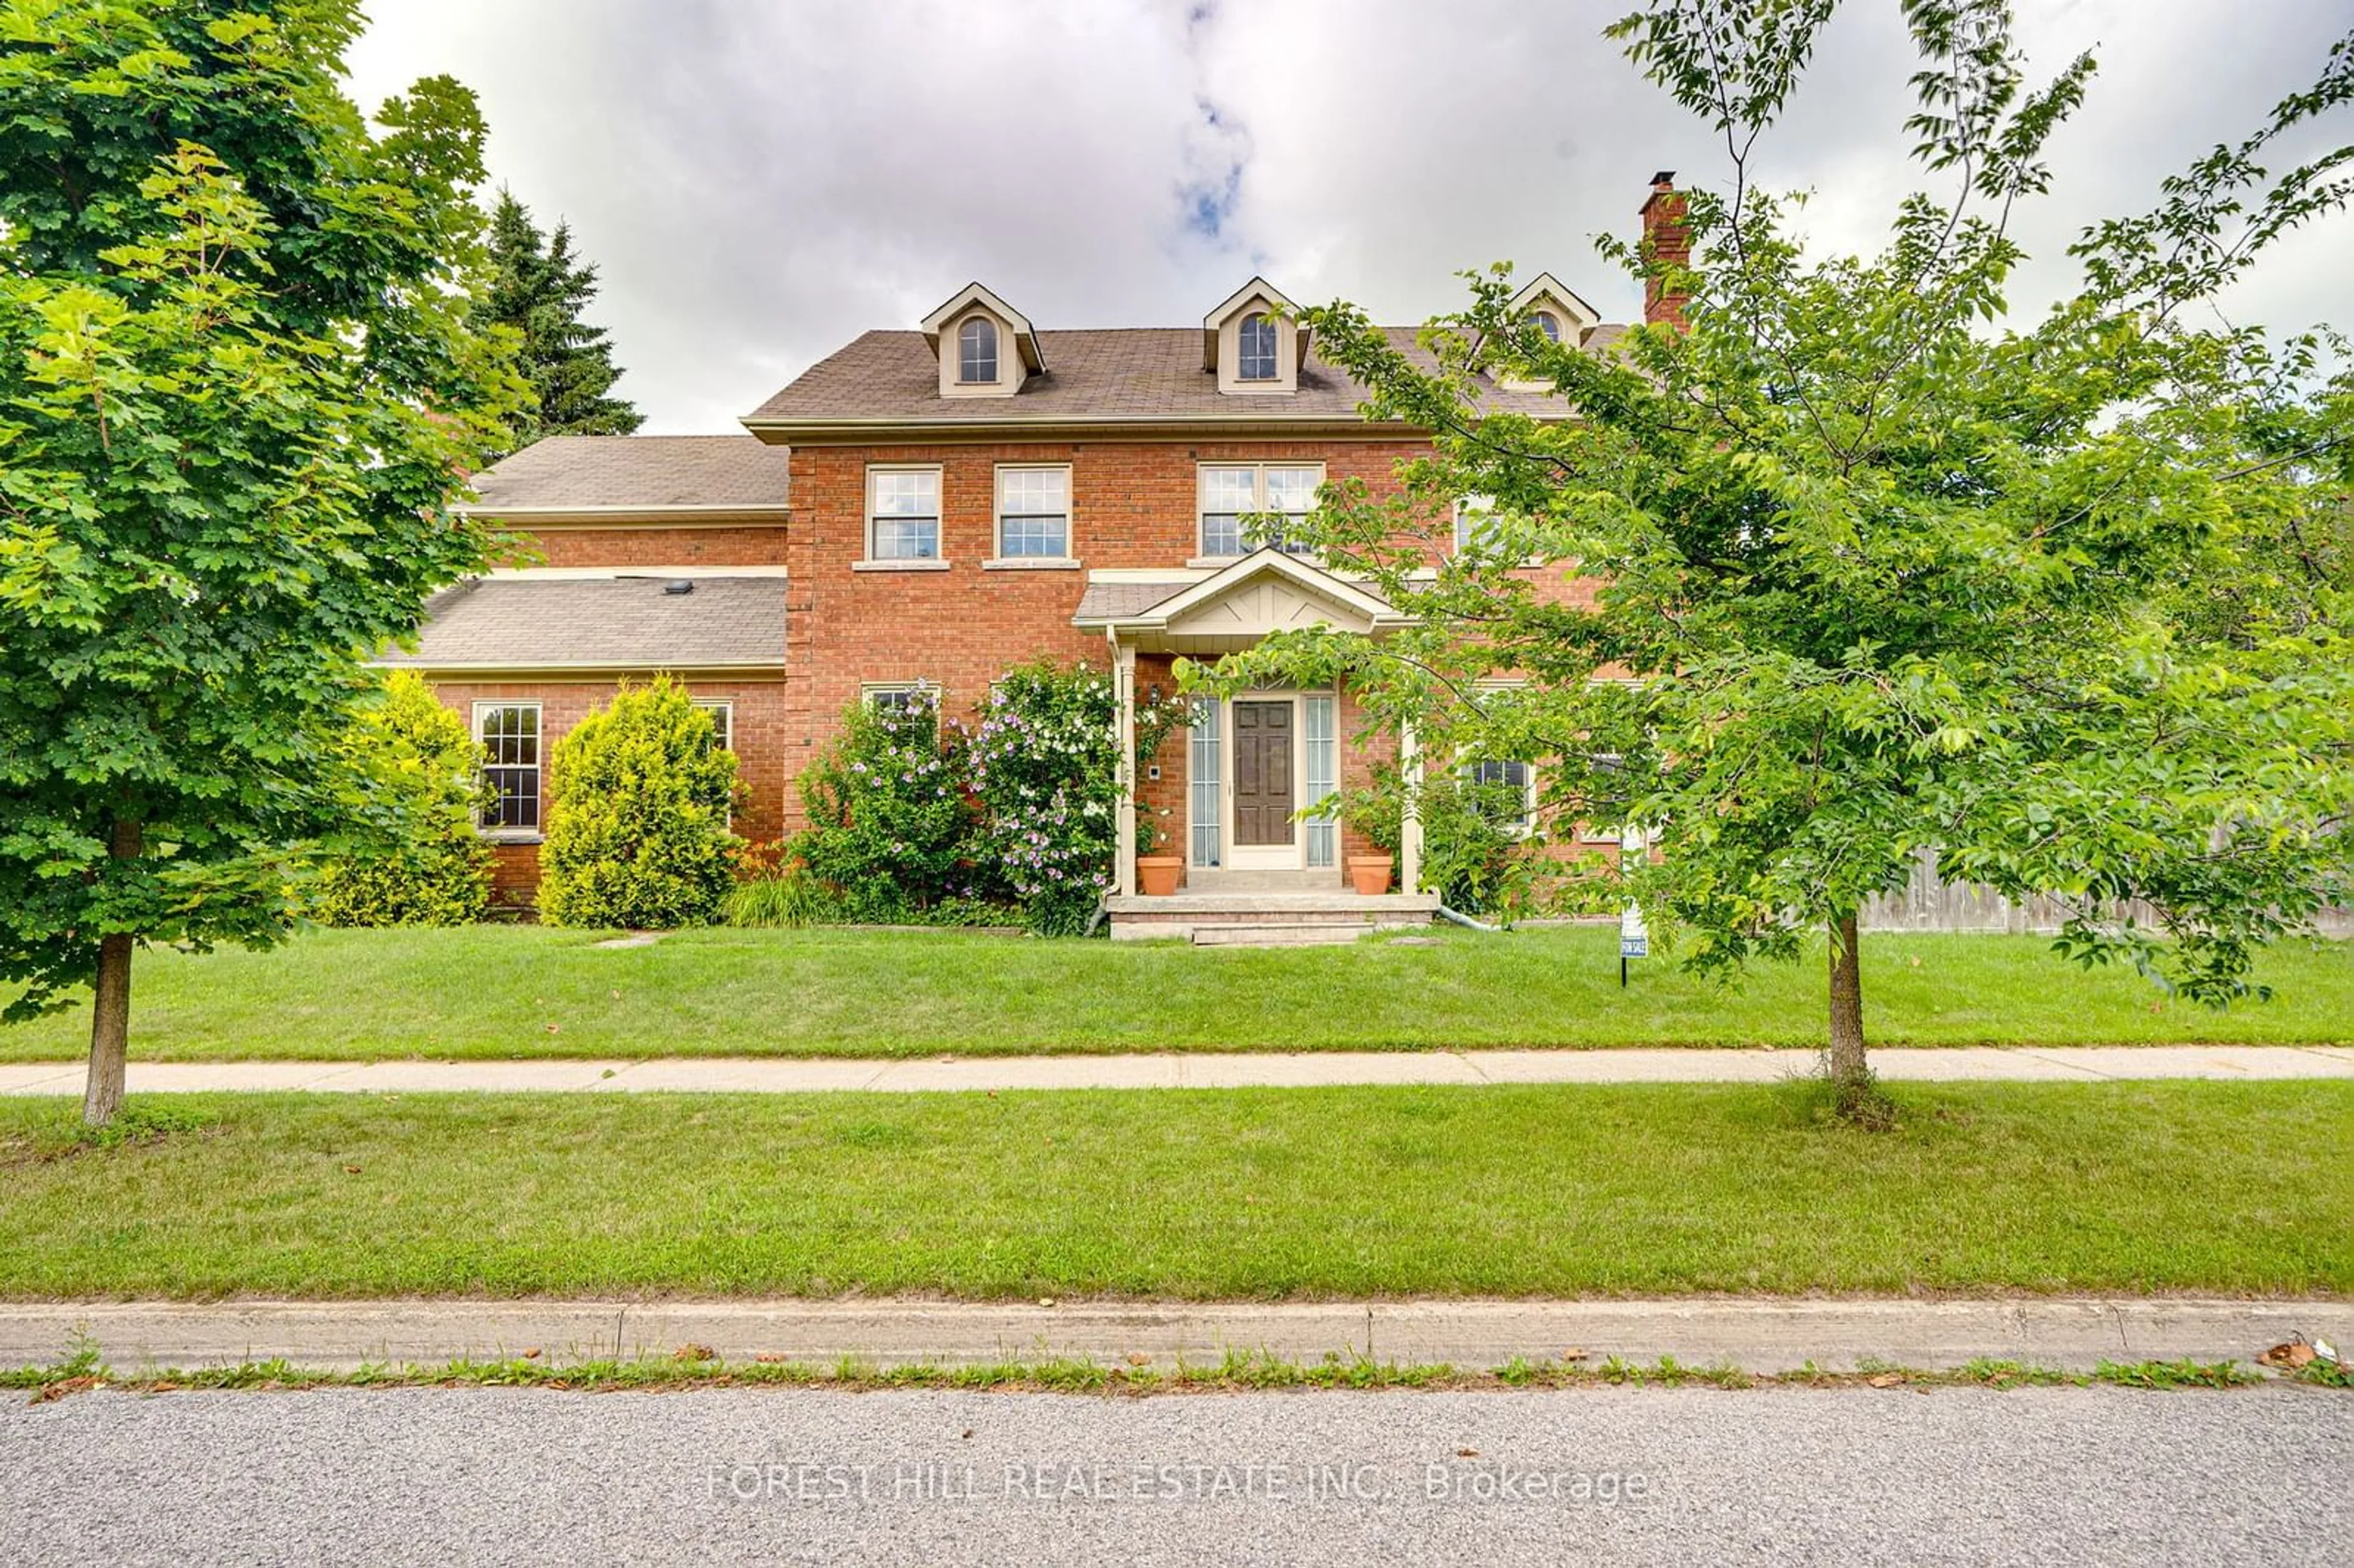 Home with brick exterior material for 487 Palmer Ave, Richmond Hill Ontario L4B 3B9